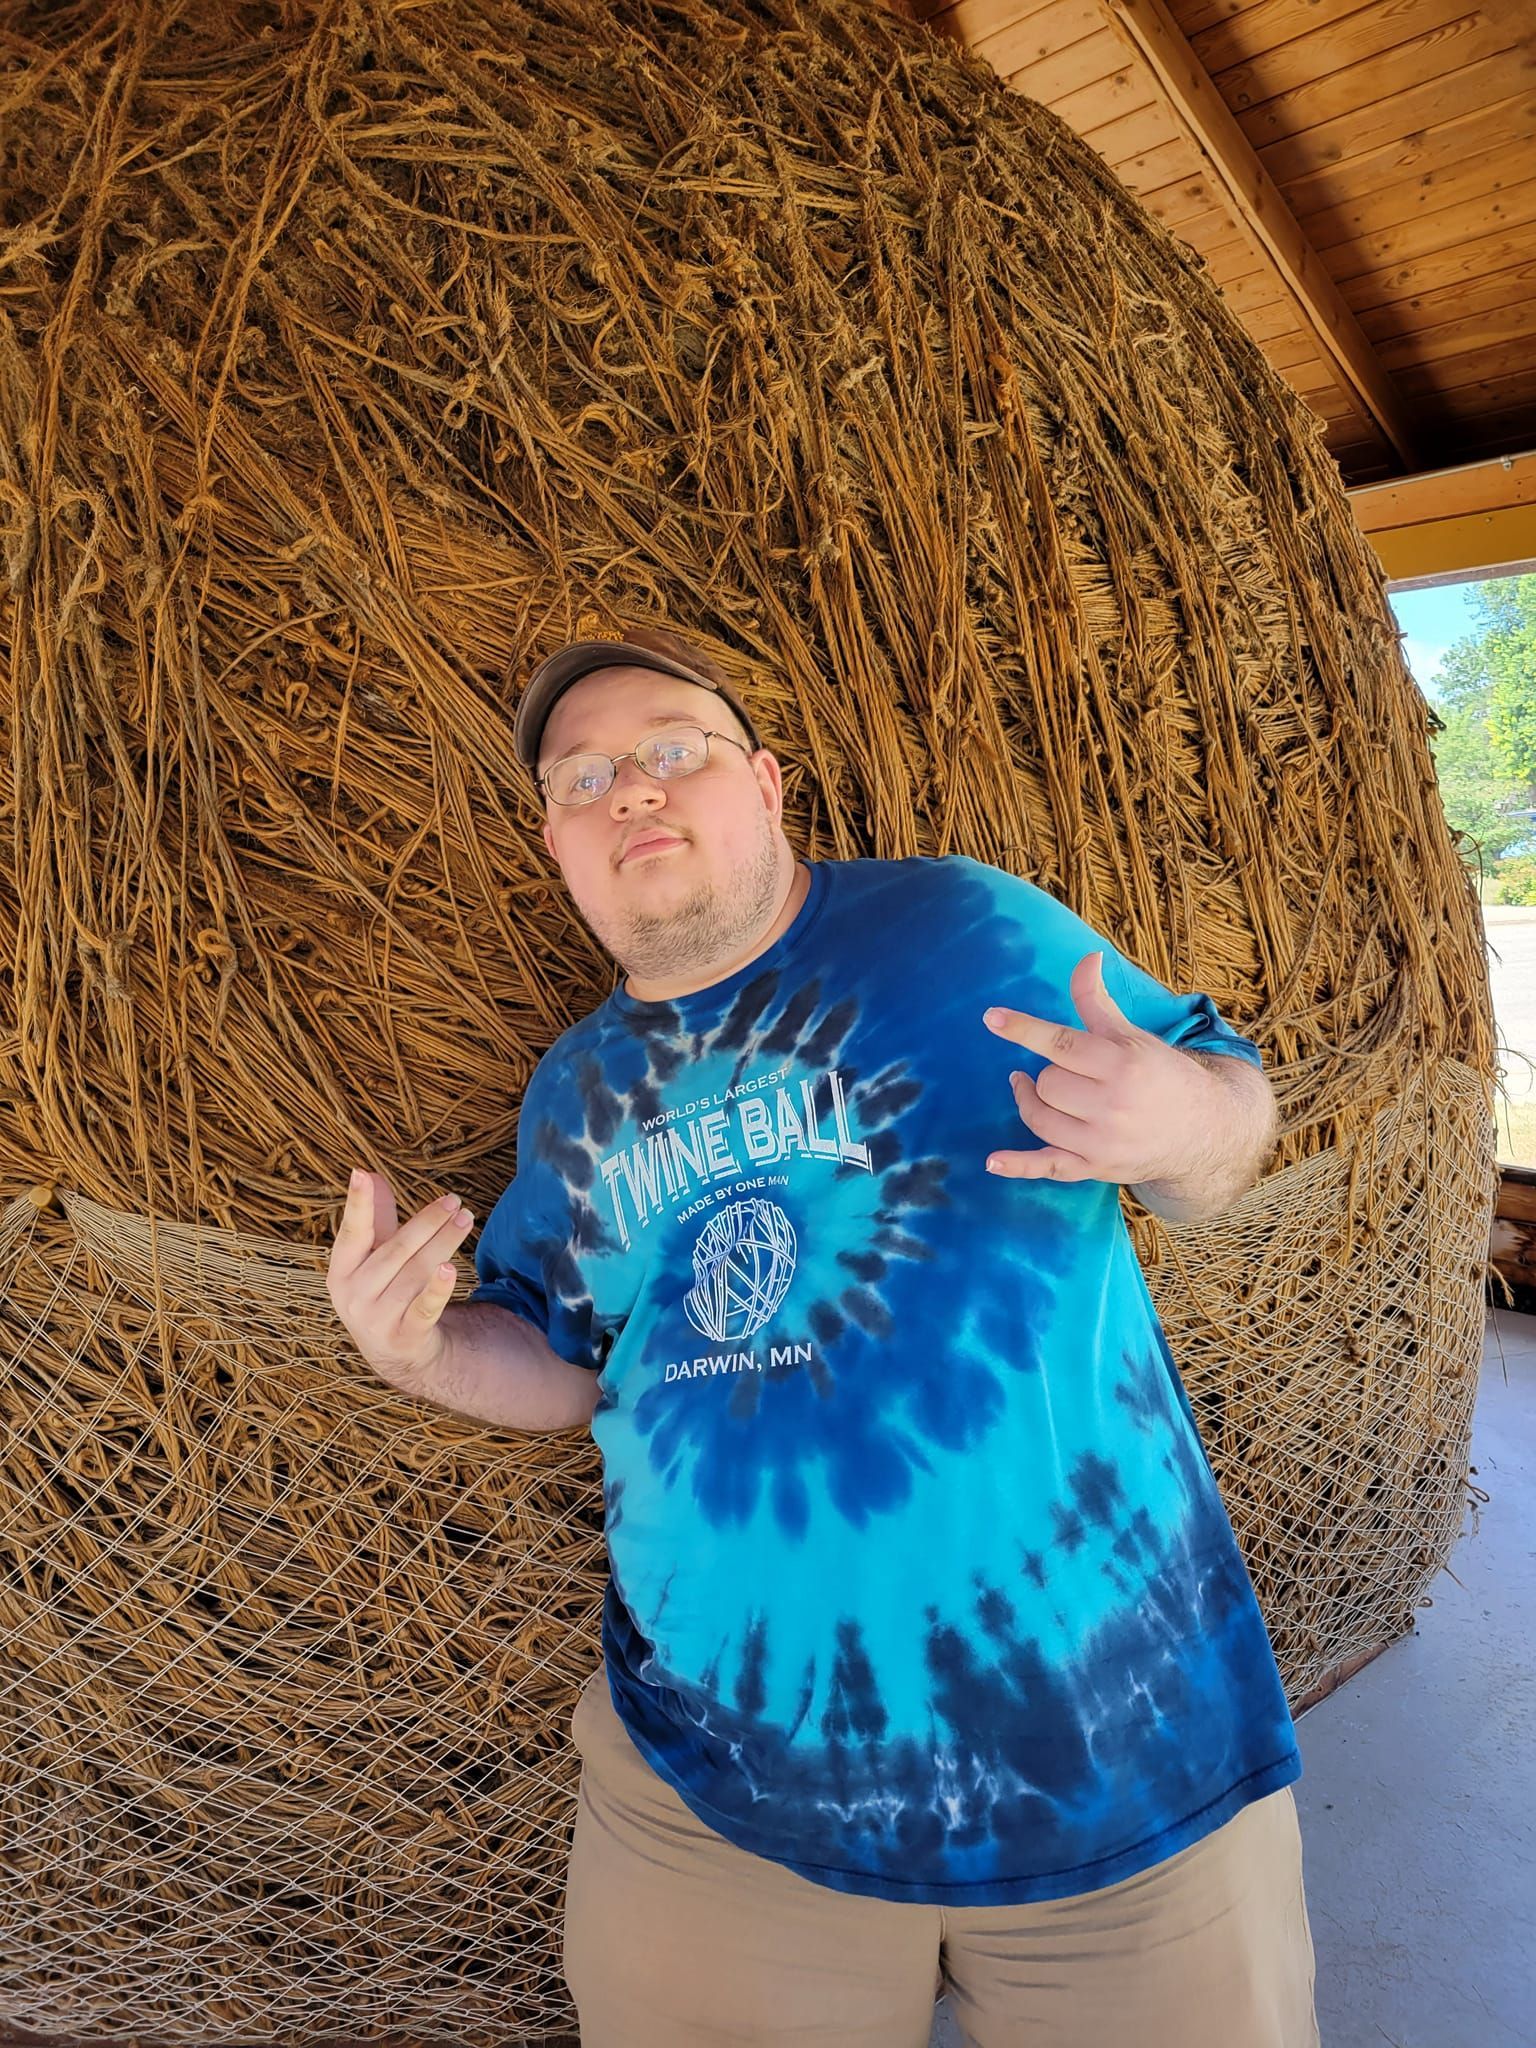 World's Largest Ball of Twine Rolled by One Man, world record in Darwin, Minnesota